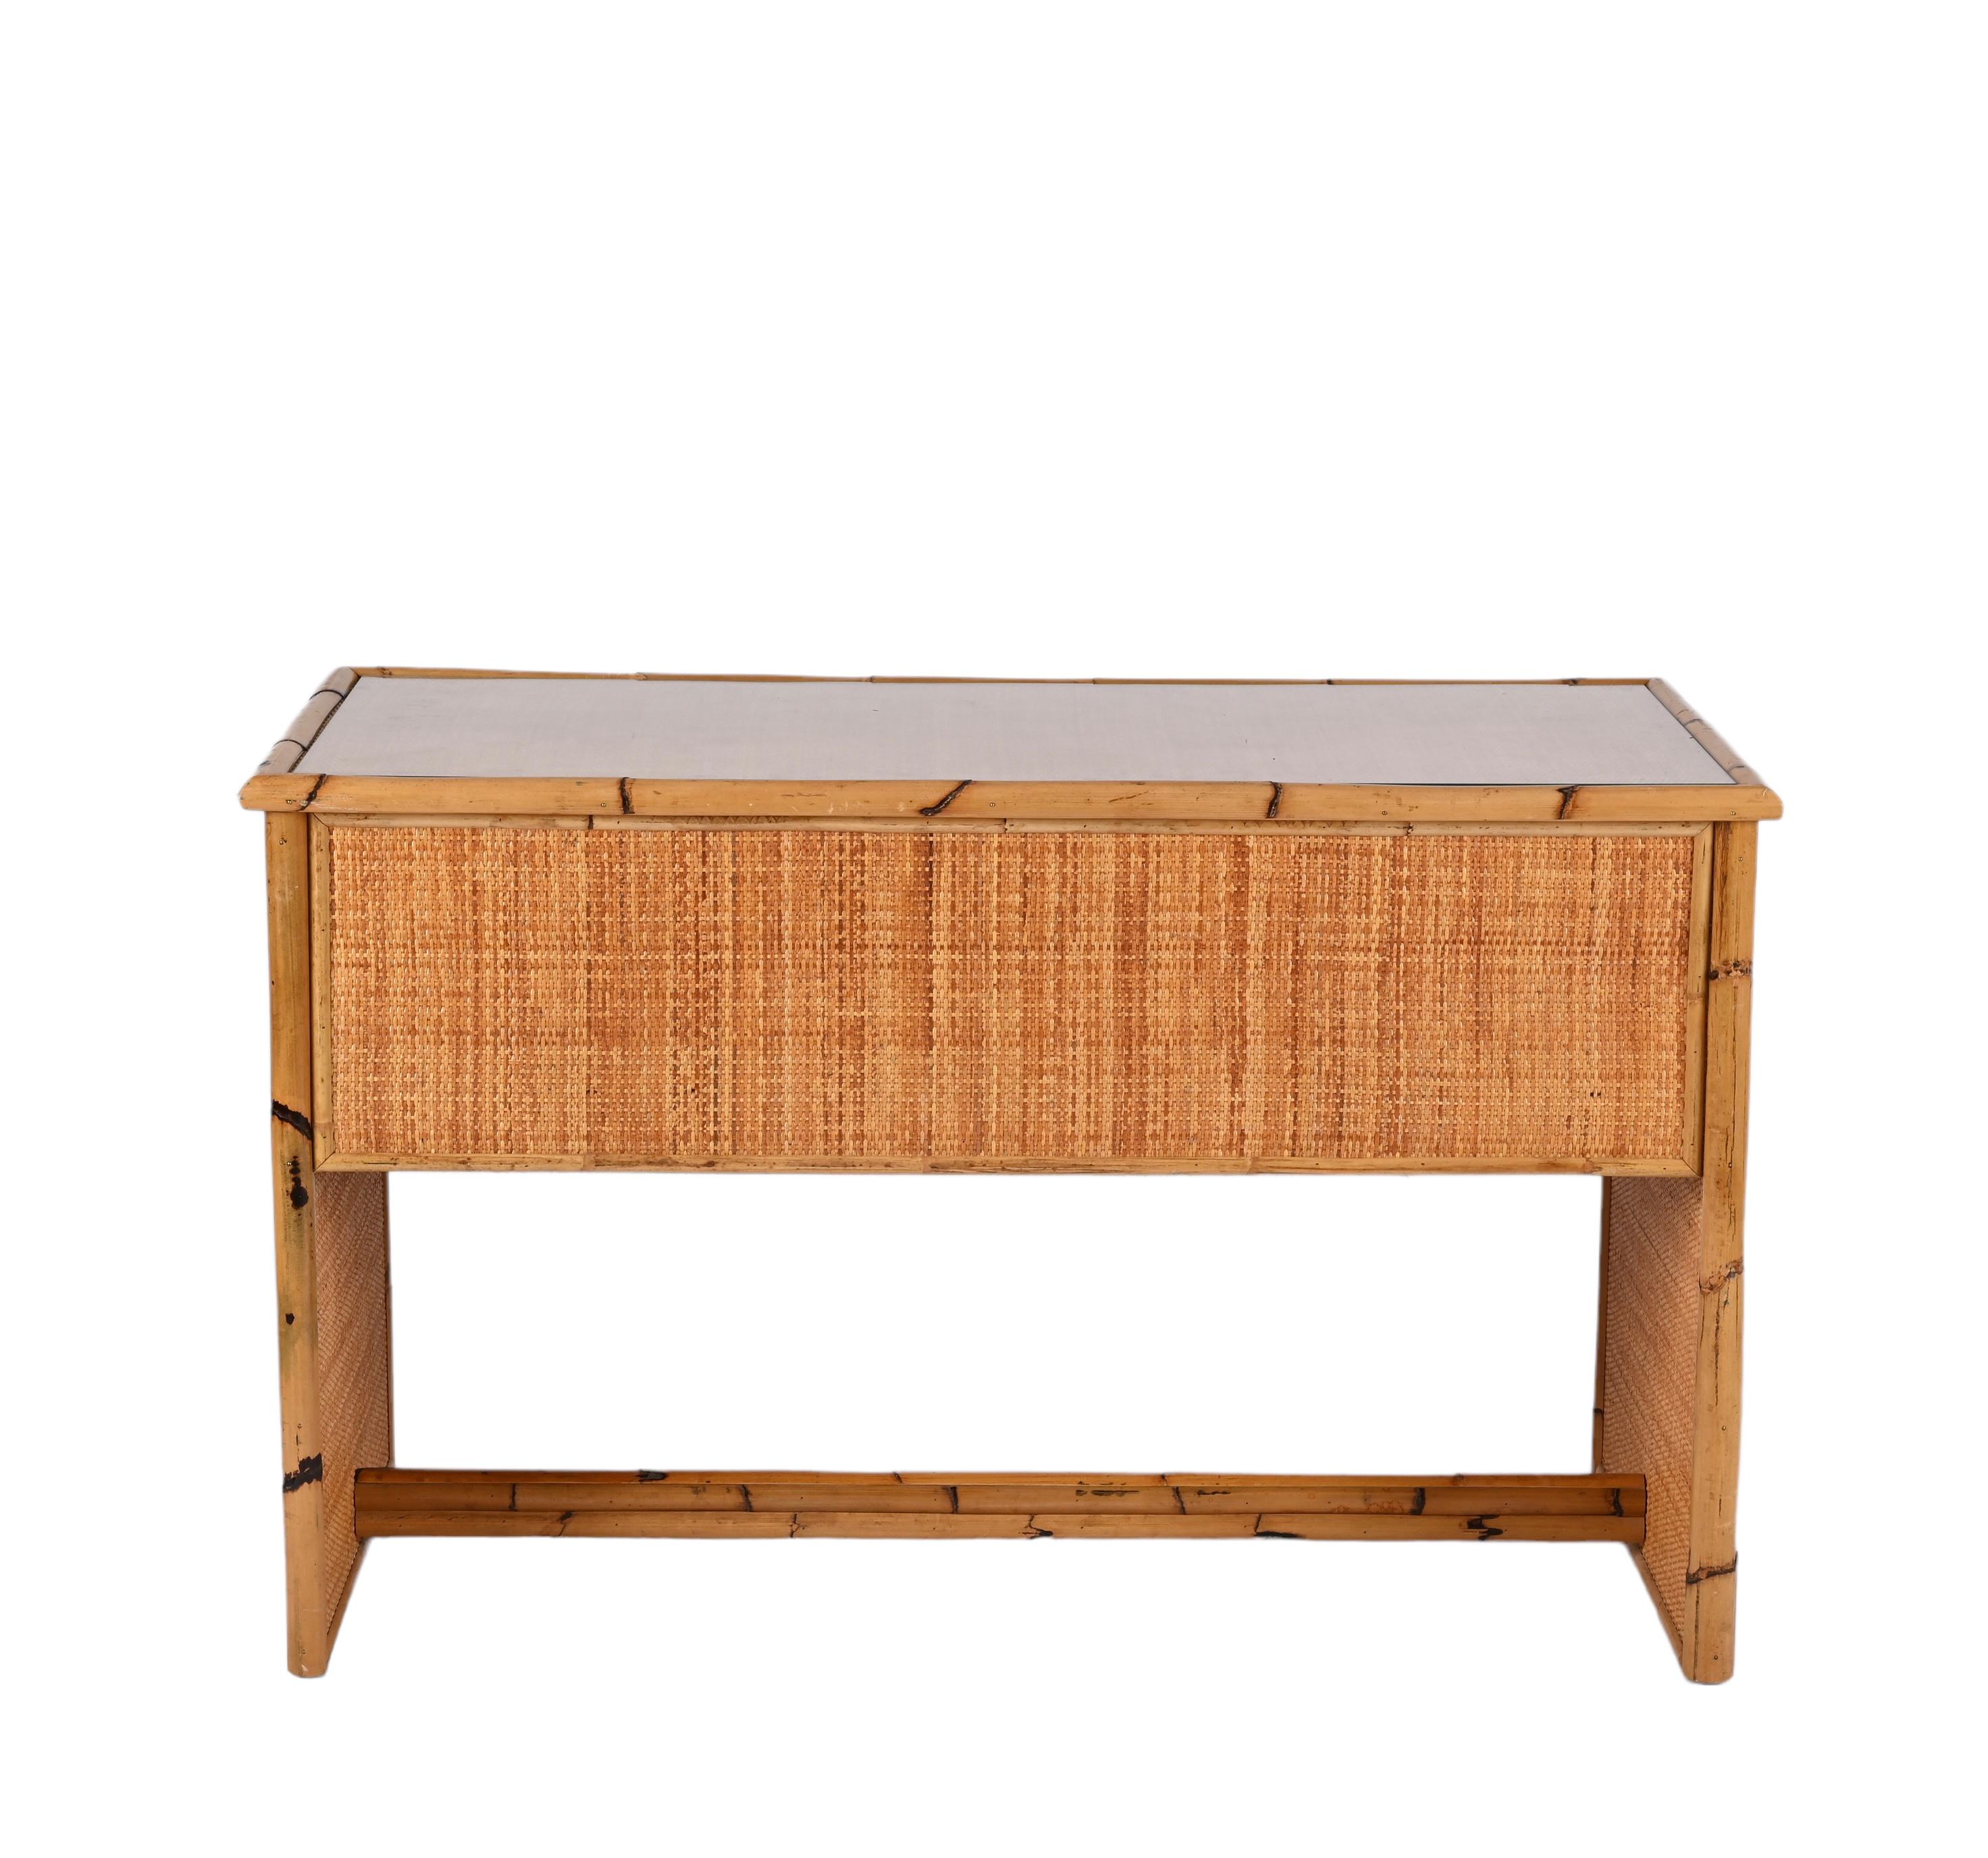 Midcentury Glass Top, Bamboo and Wicker Italian Desk with Drawers, 1980s For Sale 8